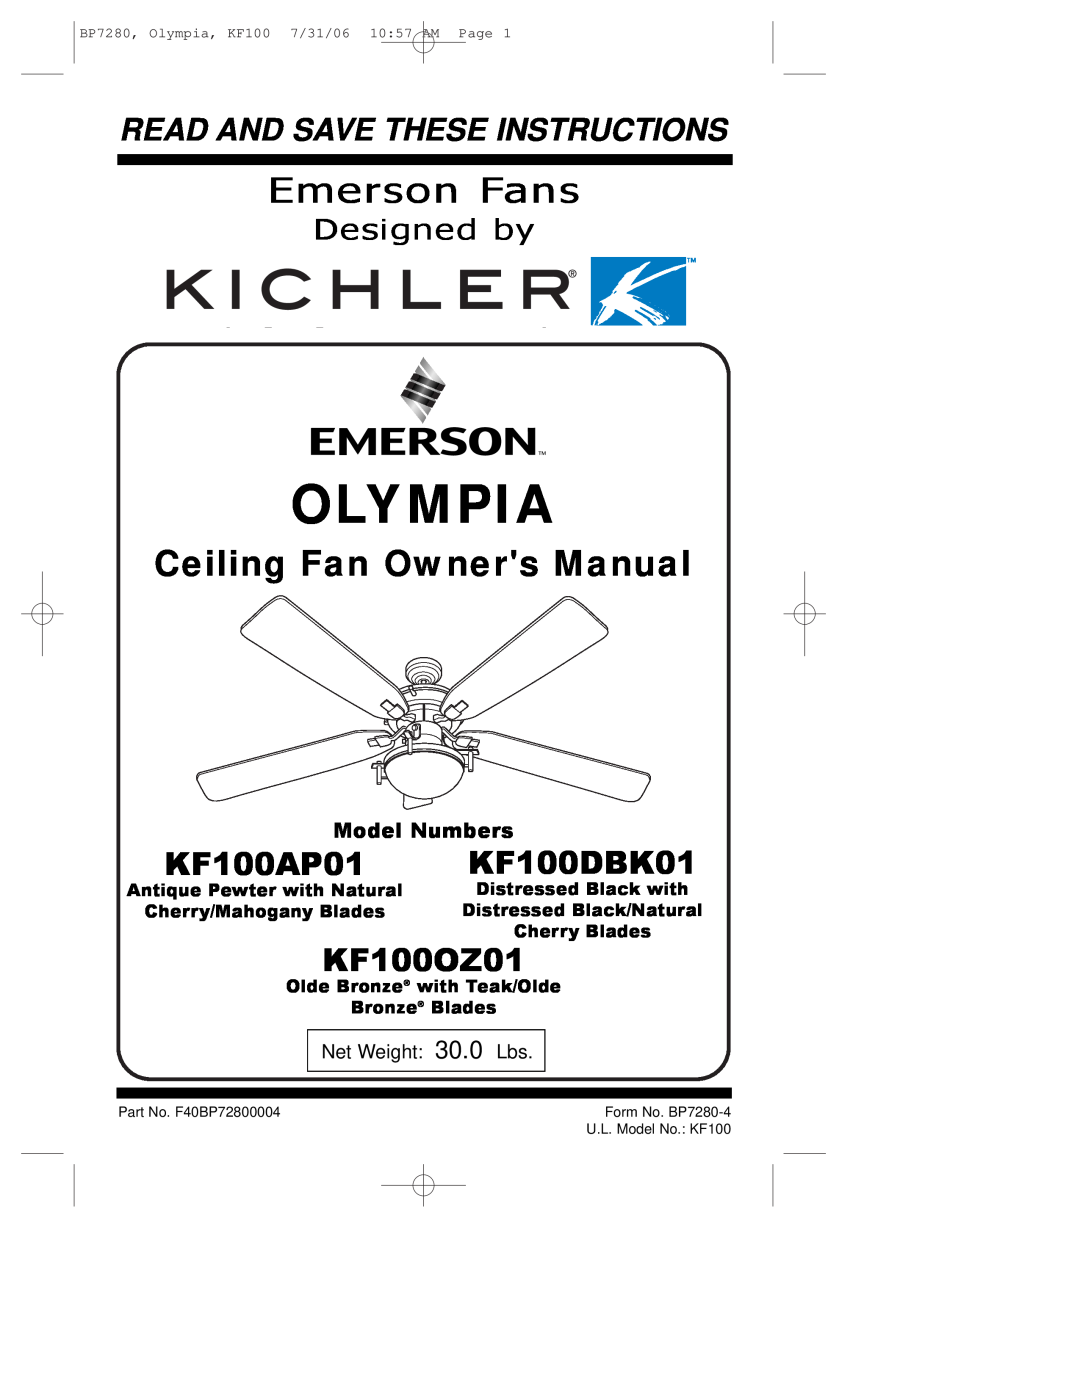 Emerson KF100OZ01 owner manual Olympia, Emerson Fans, KF100AP01, KF100DBK01, Read And Save These Instructions, Designed by 